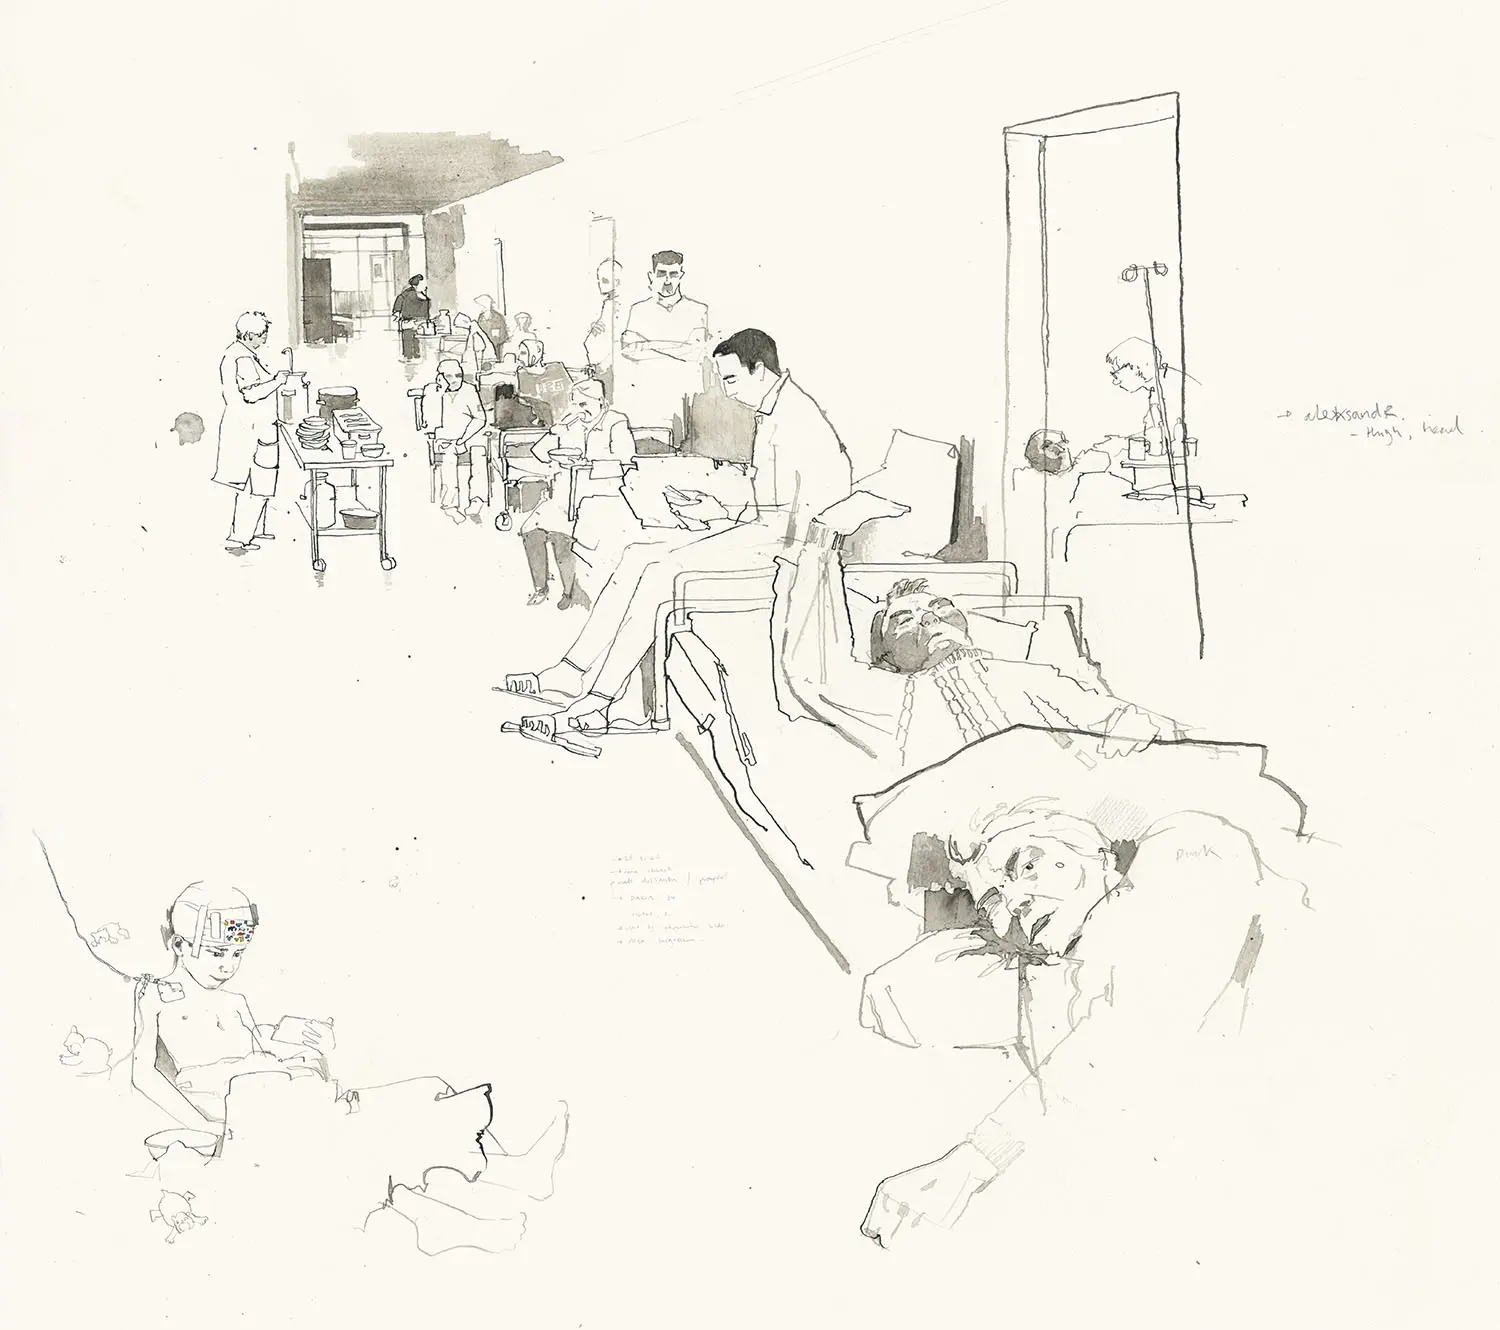 Illustrations. In the bottom left corner, a young boy with bandages on his head lays in bed and looks at a smart phone. In the top illustration, people line a hallway, either sitting down or on beds. 